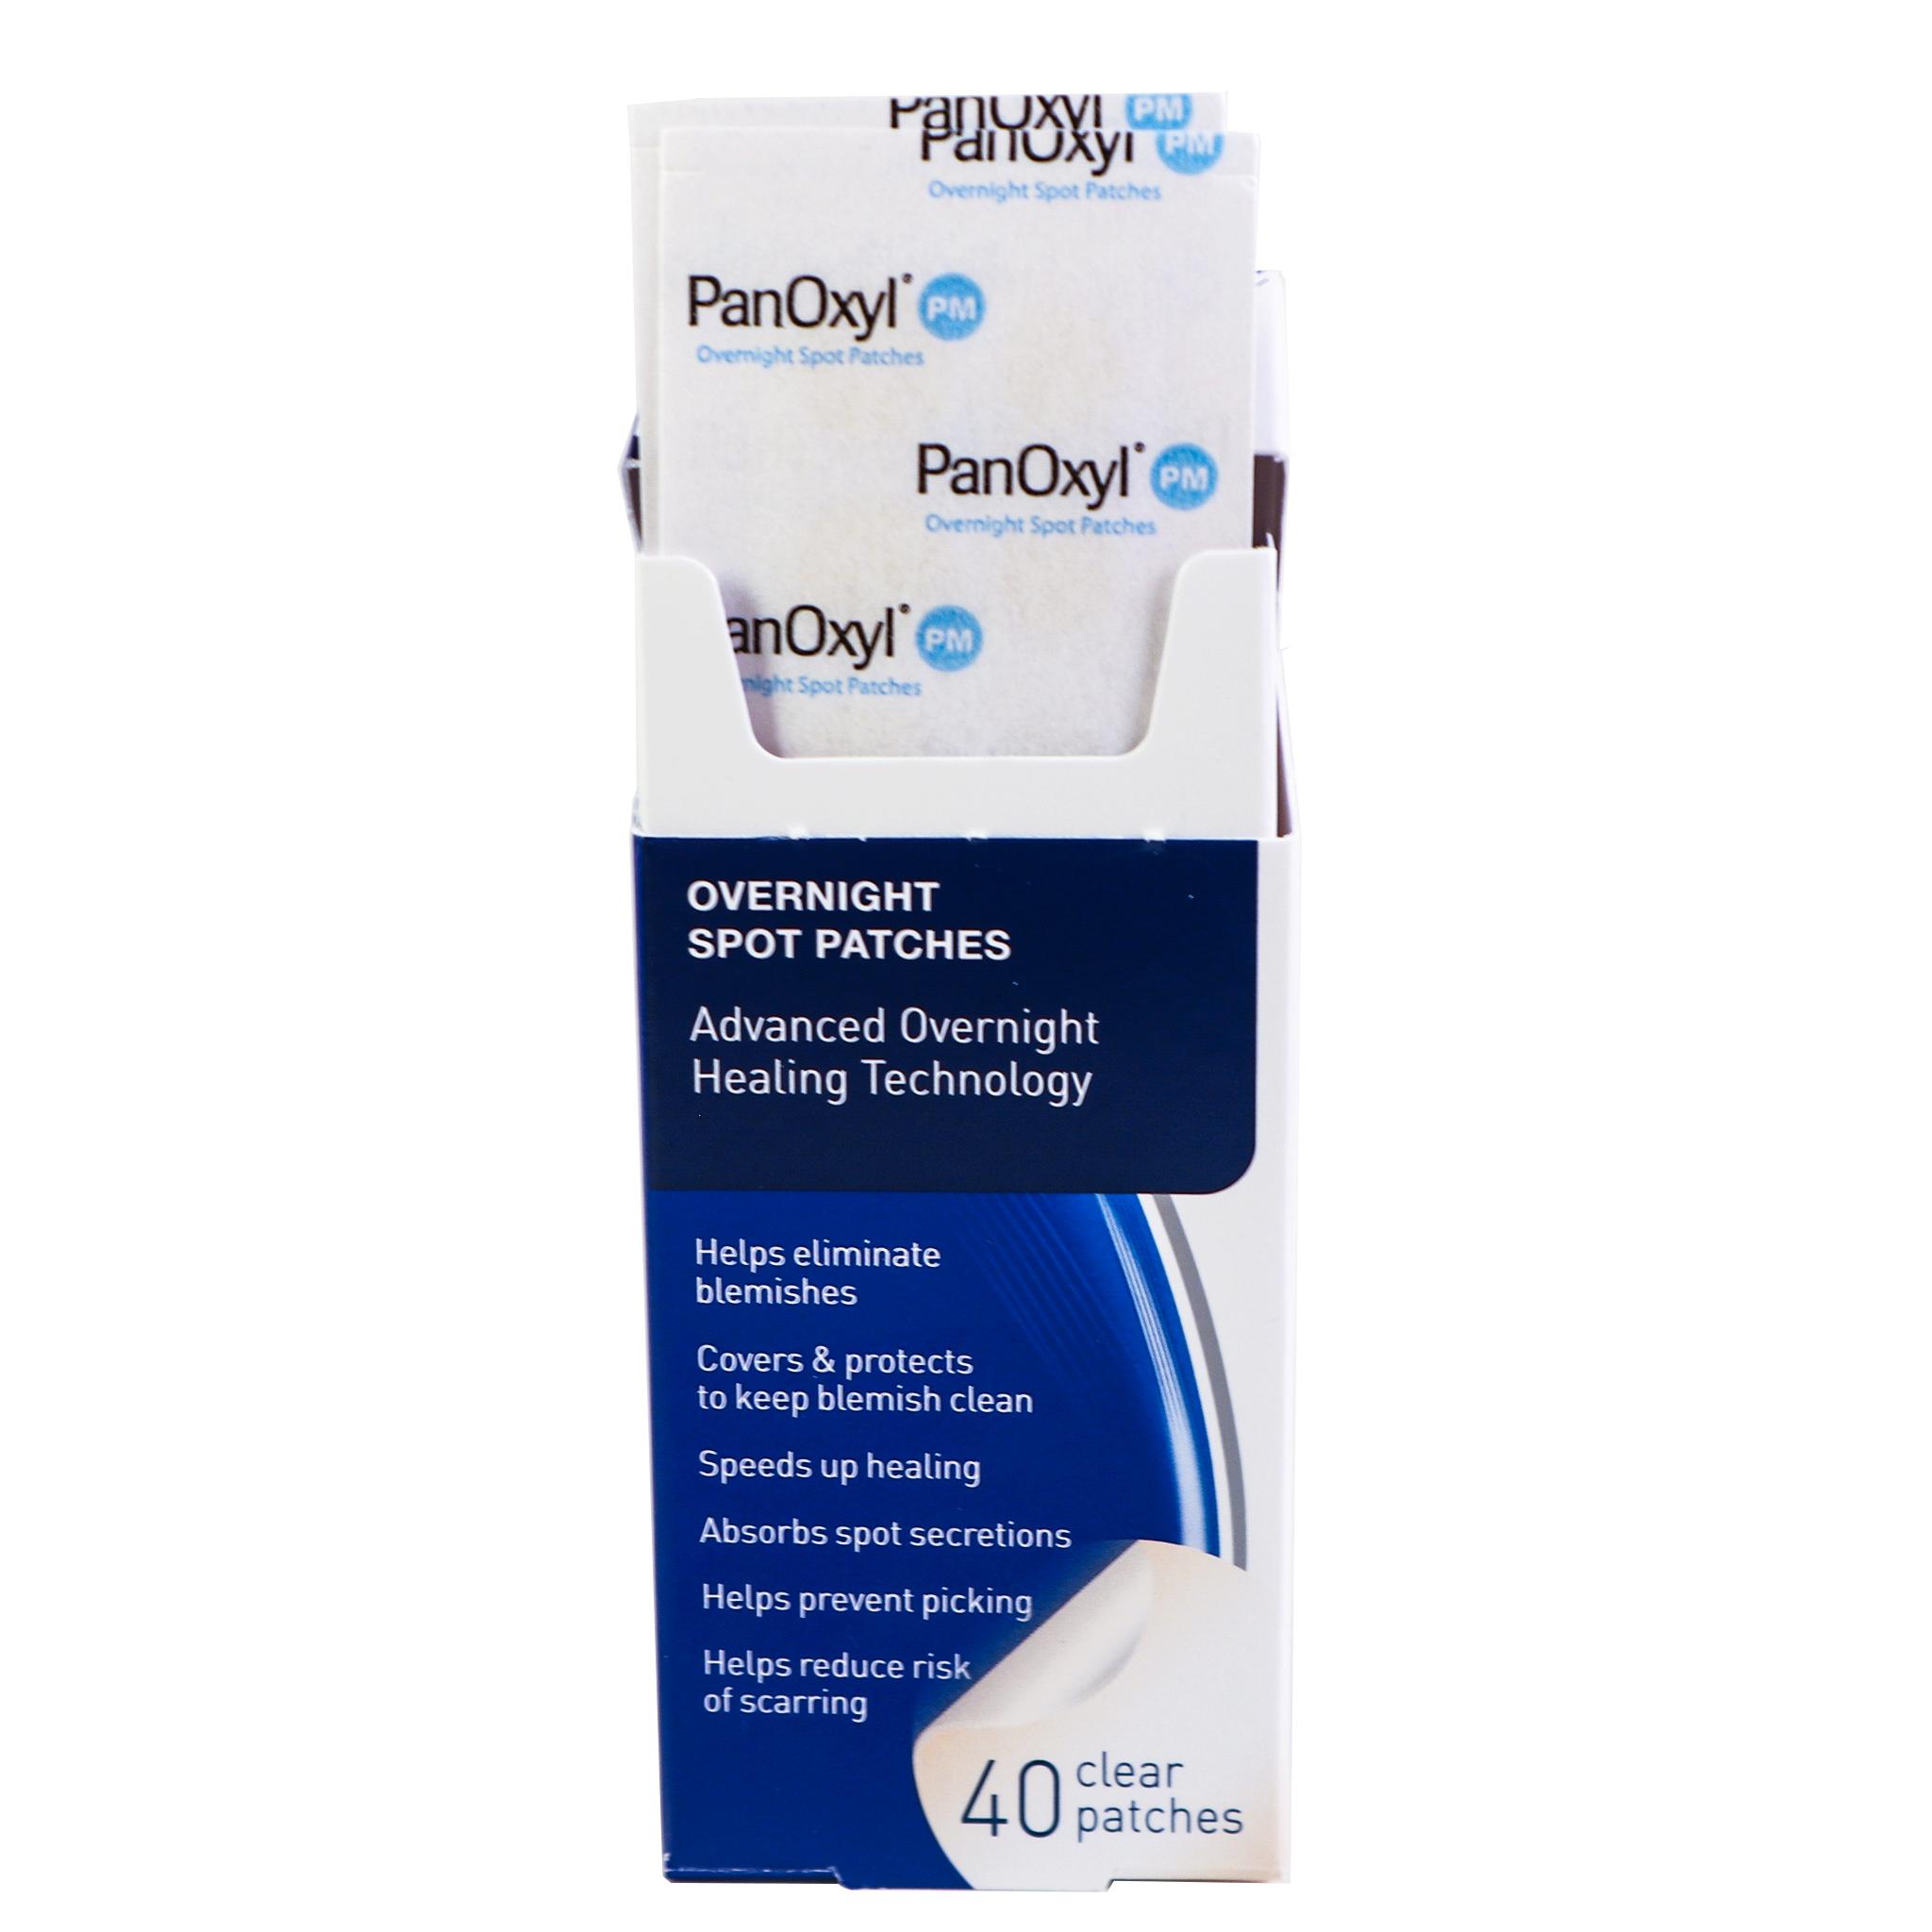 PanOxyl PM Overnight Spot Patches 40ct